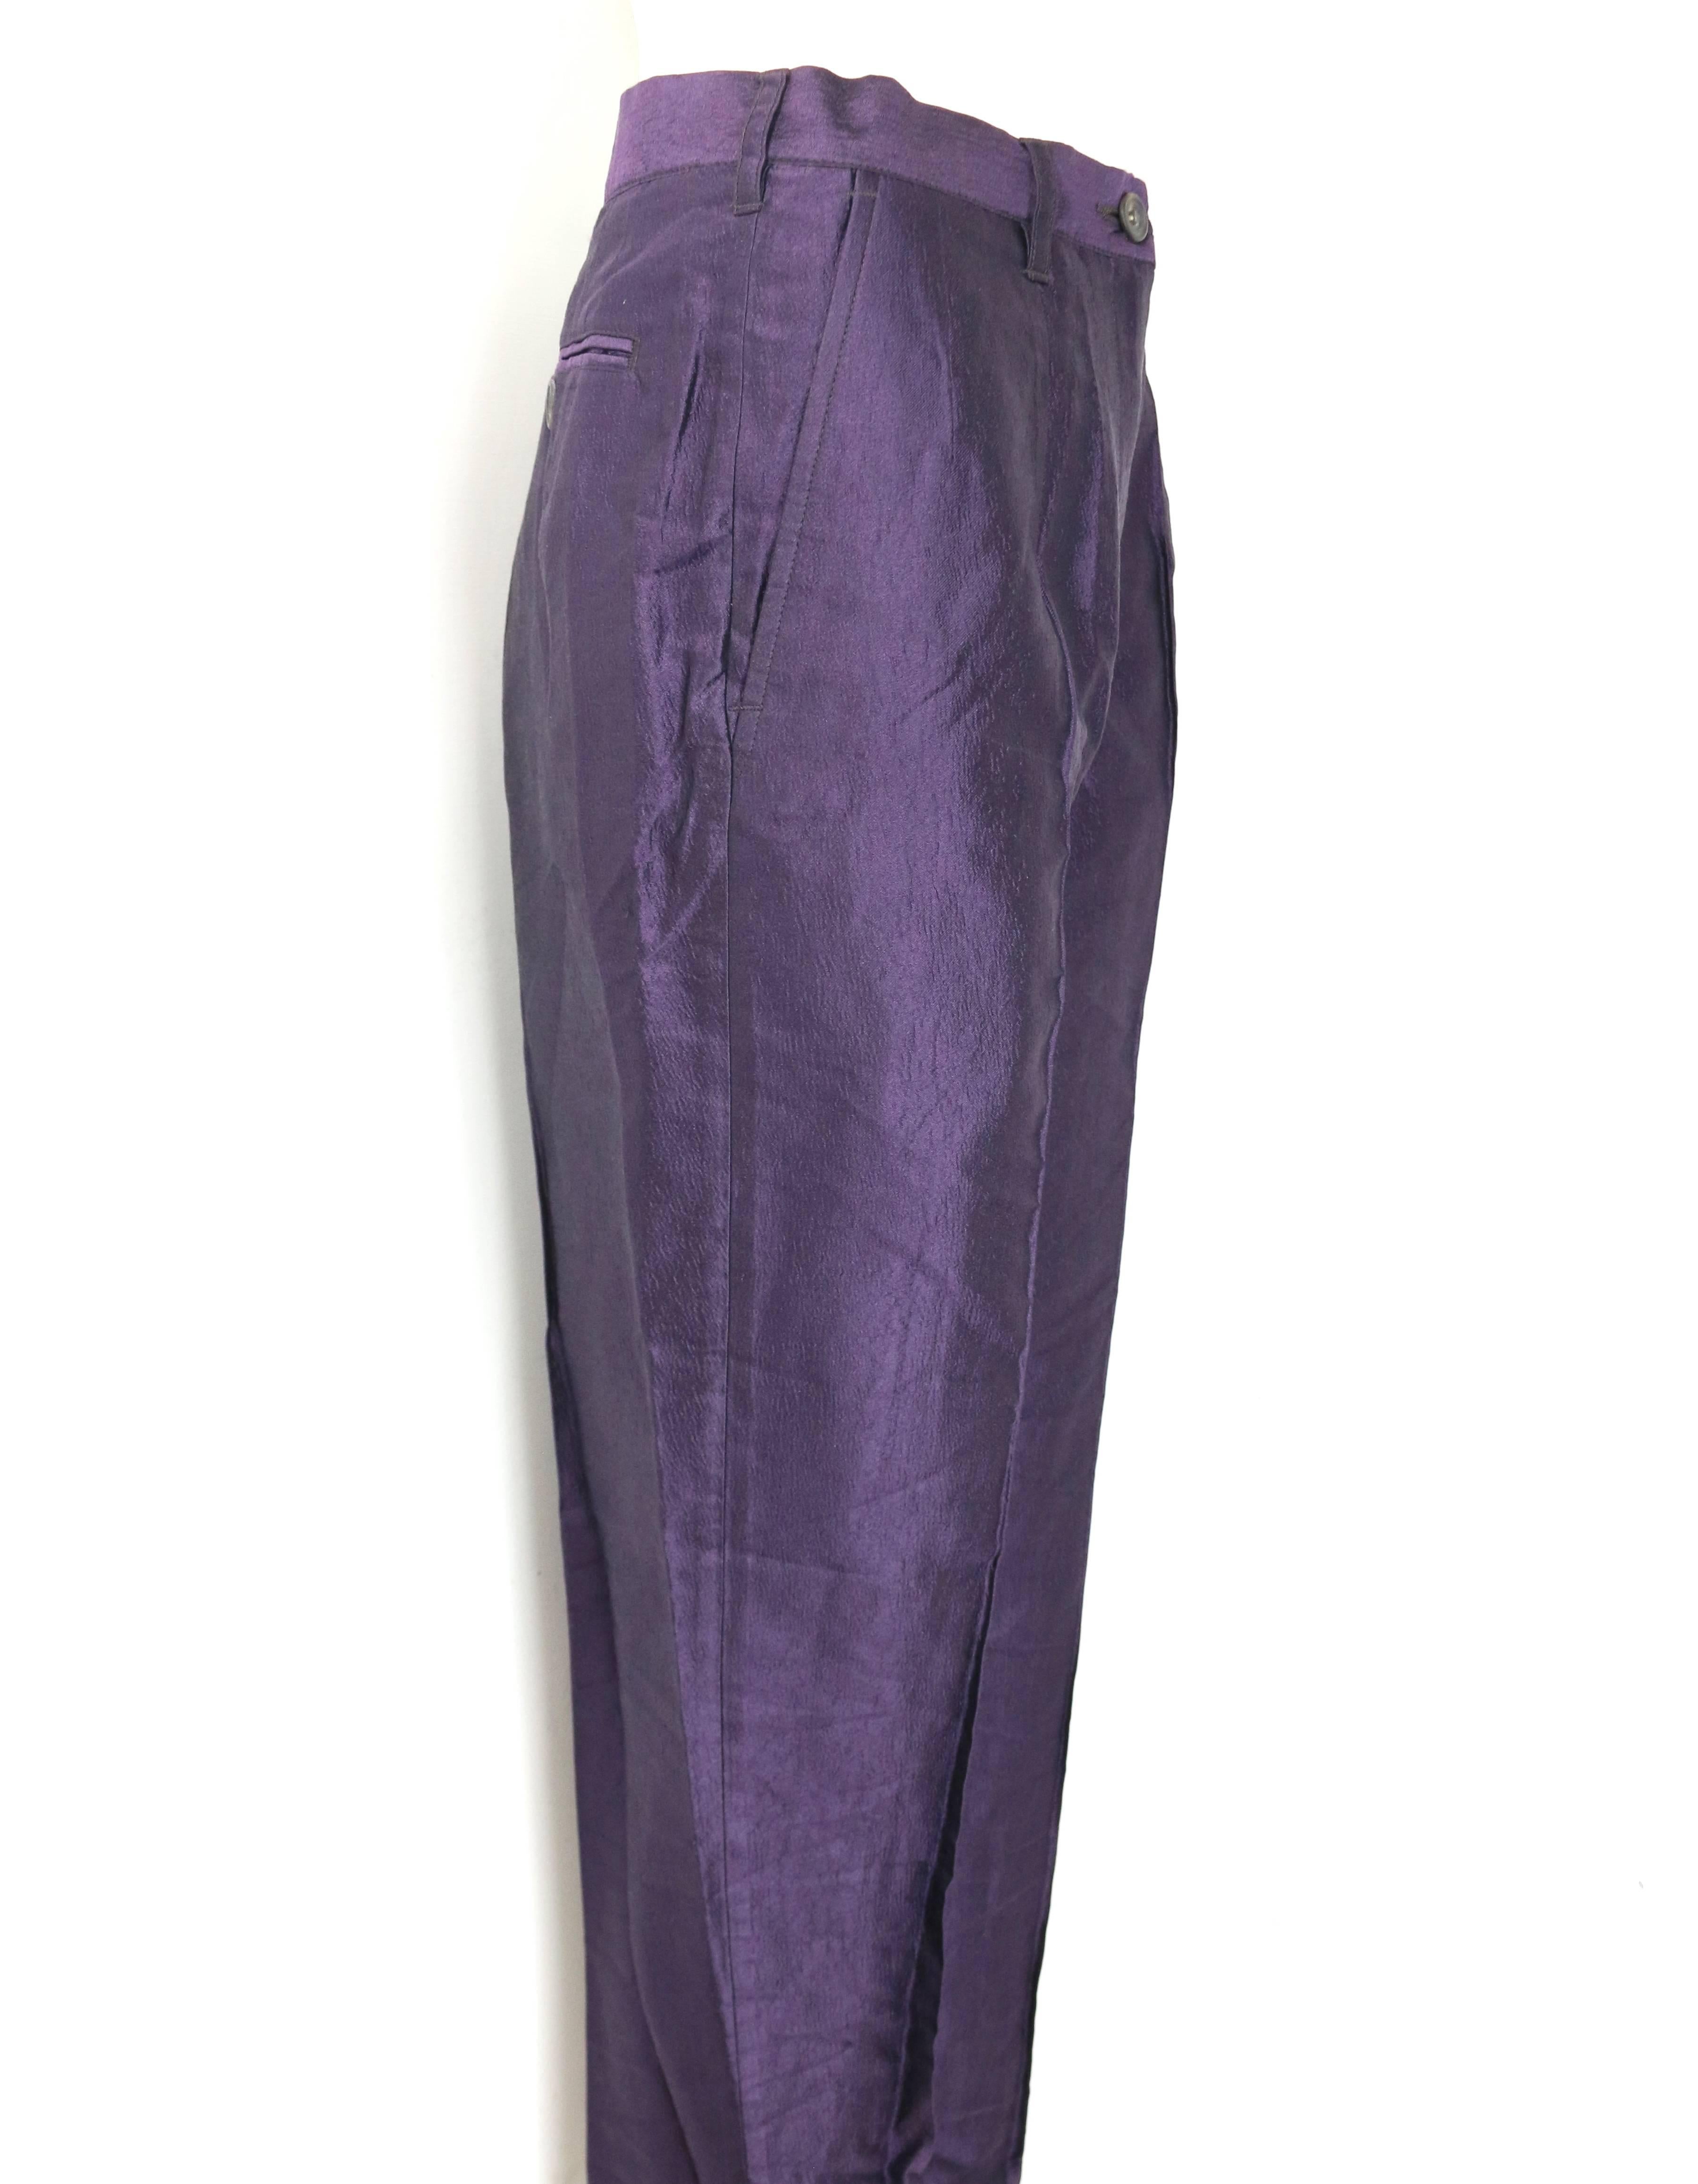 - Vintage 90s Dries Van Noten purple silk pants. 

- Deliberately creased effect. 

- Straight leg carrot style cutting. 

- Button and zip fly fastening. One back pocket with button closure. 

- Belt Loop. 

- Side pockets.

- Center Crease. 

-